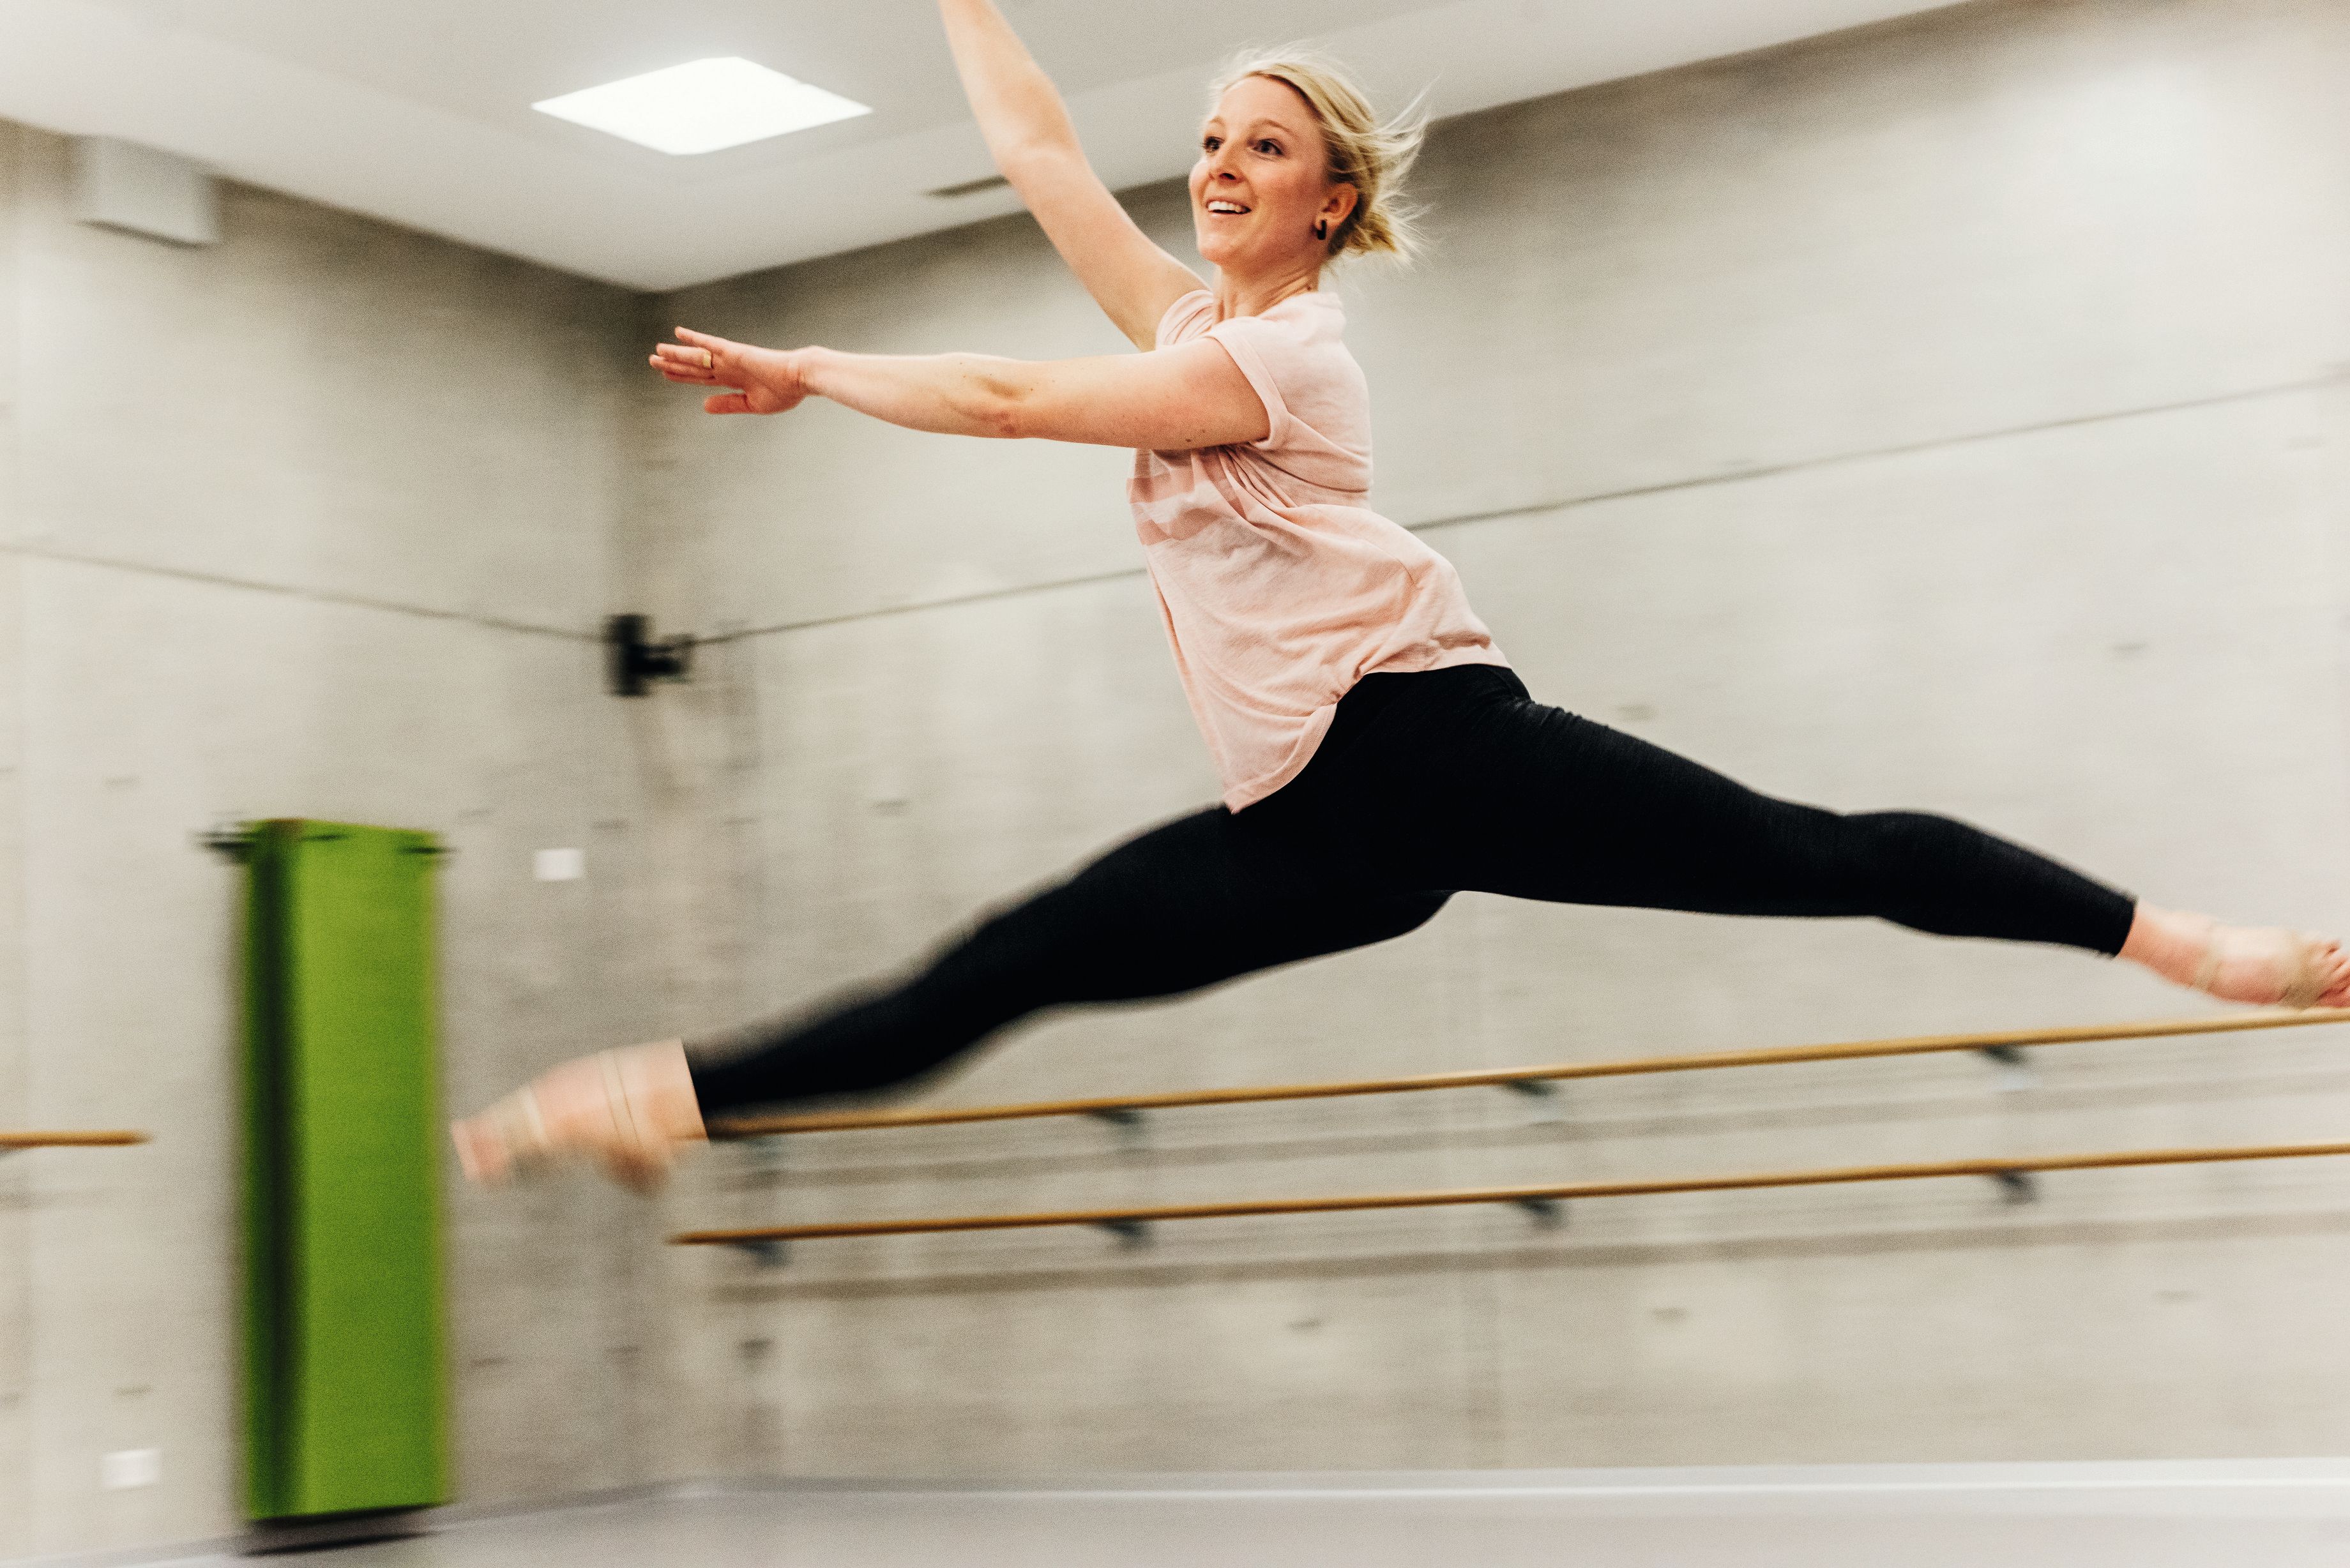 Stephanie Schelling is equally adept at ballet and skiing. 